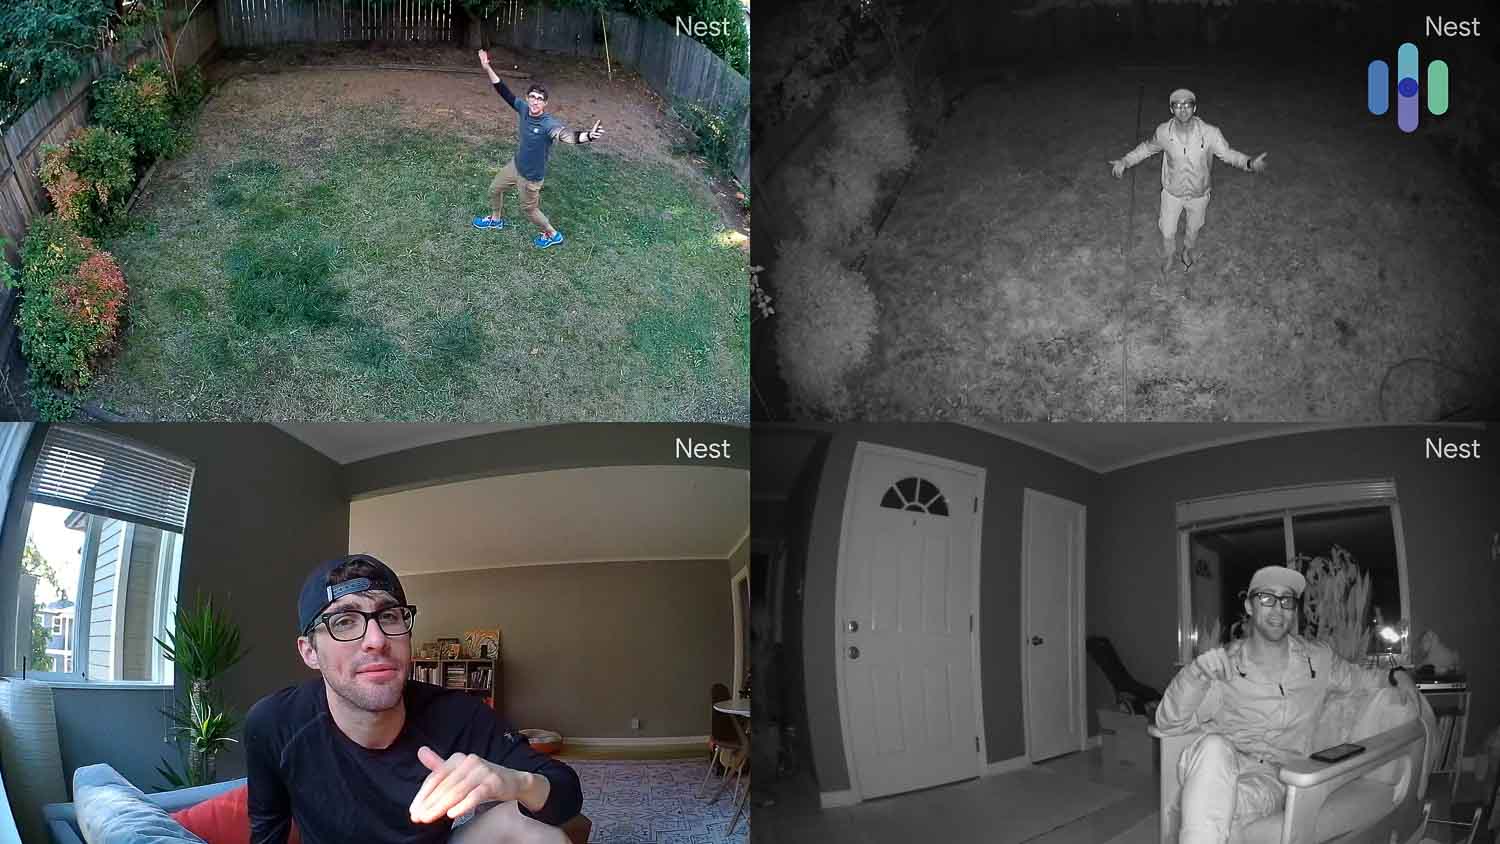 Day and night video samples from the Google Nest Cam